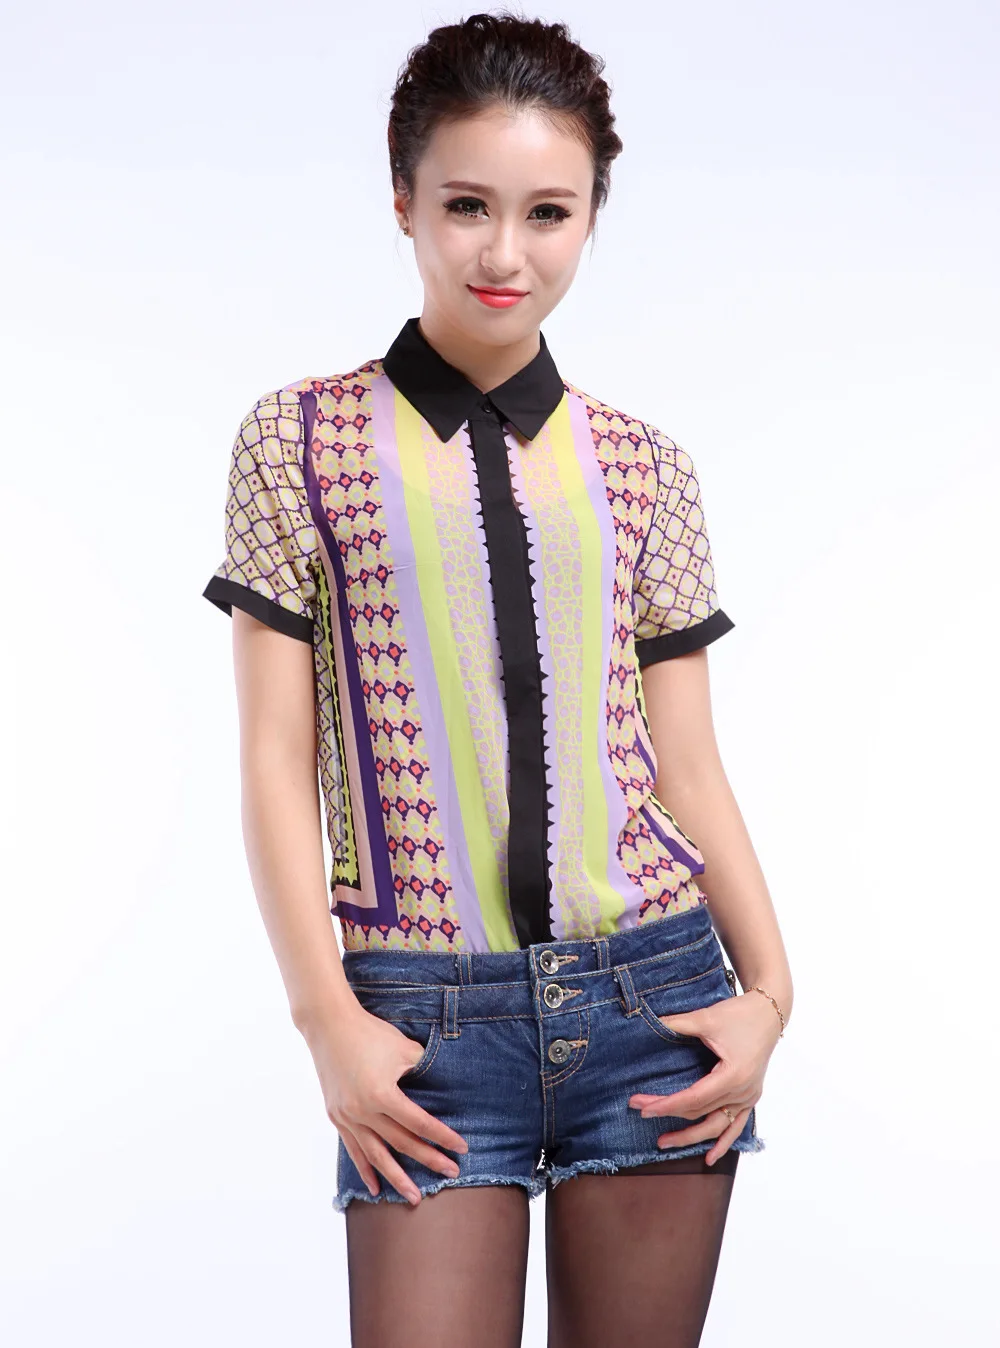 

New 2019 Fashion Short Sleeve Print Blouses Shirts For Women Casual OL Summer lapel geometric patterns Tops S-L